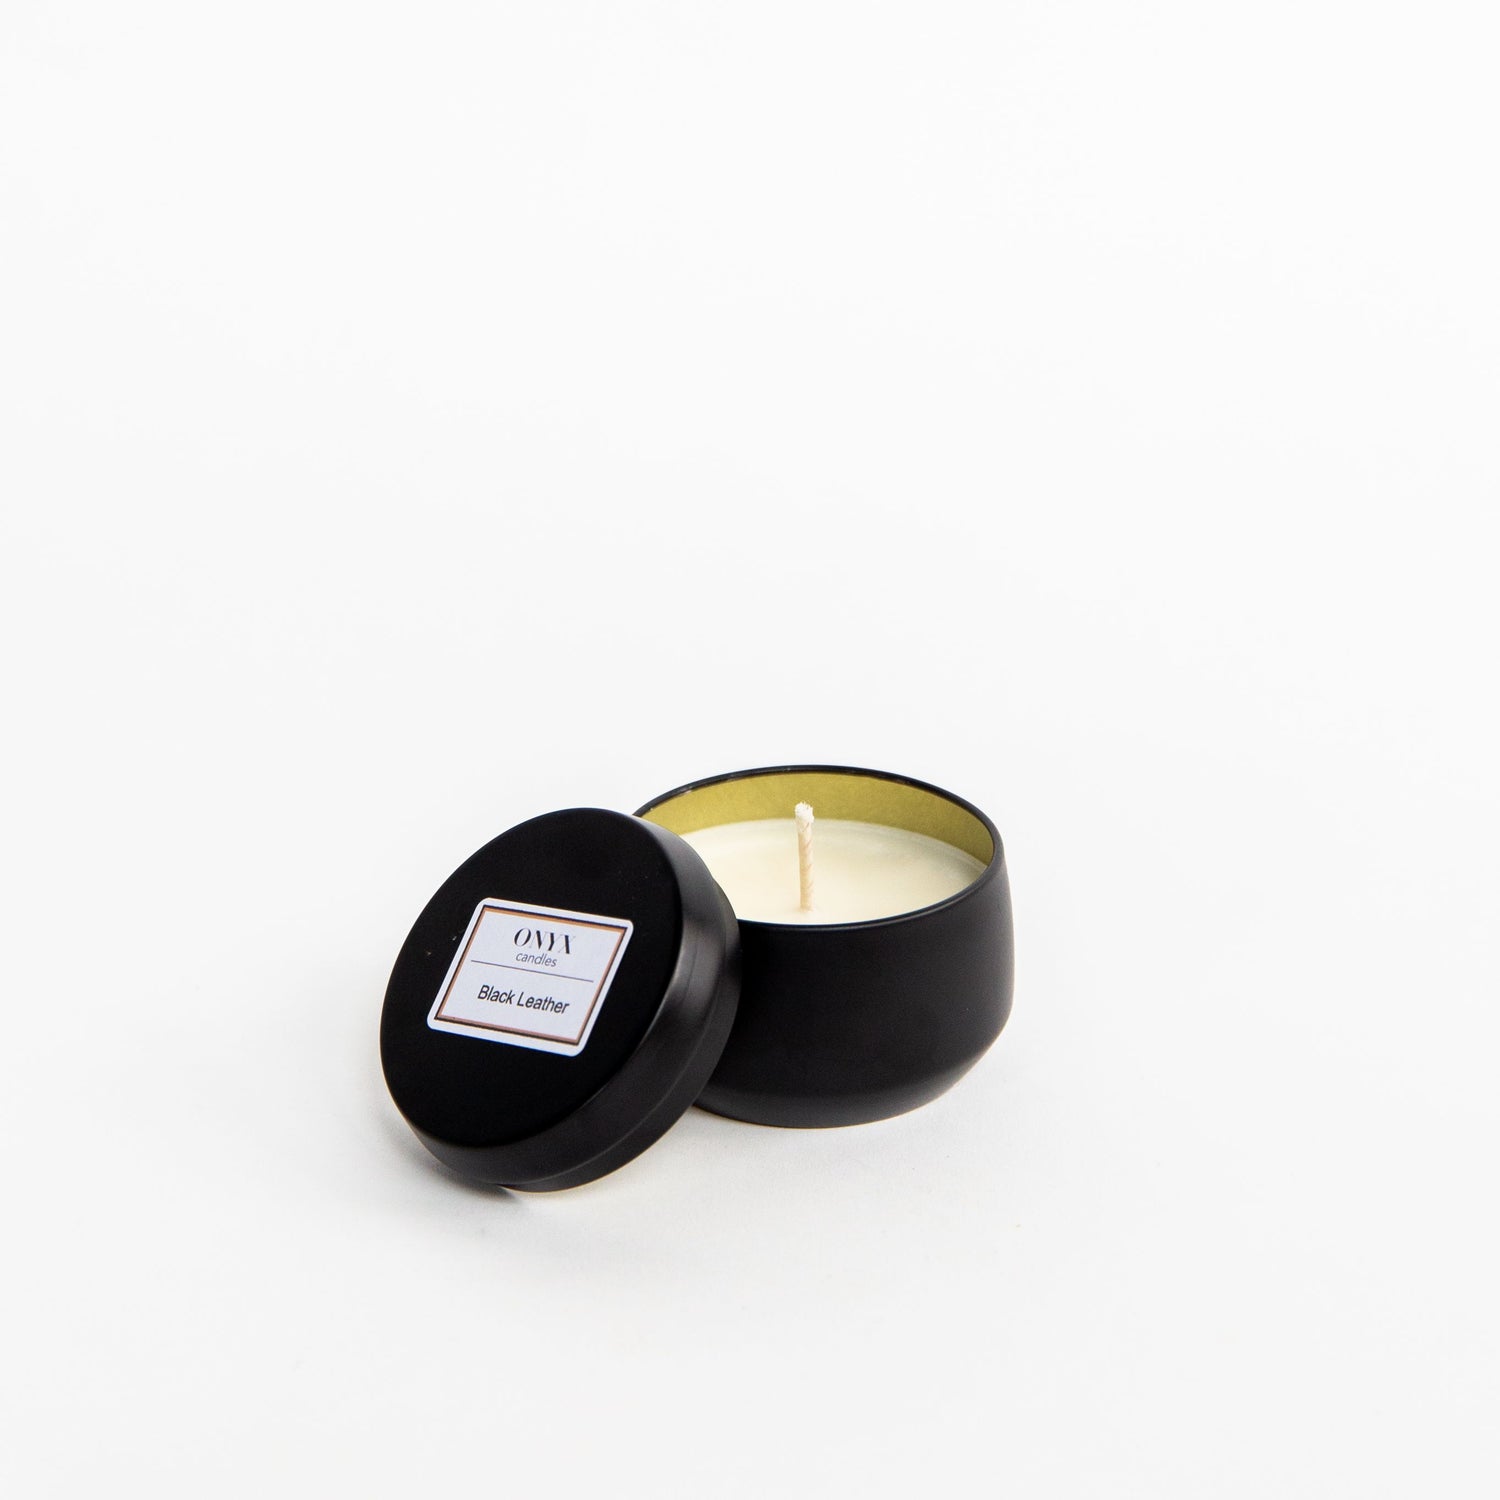 Pictured is the 4 oz matte black tin candle, in the scent Black Leather